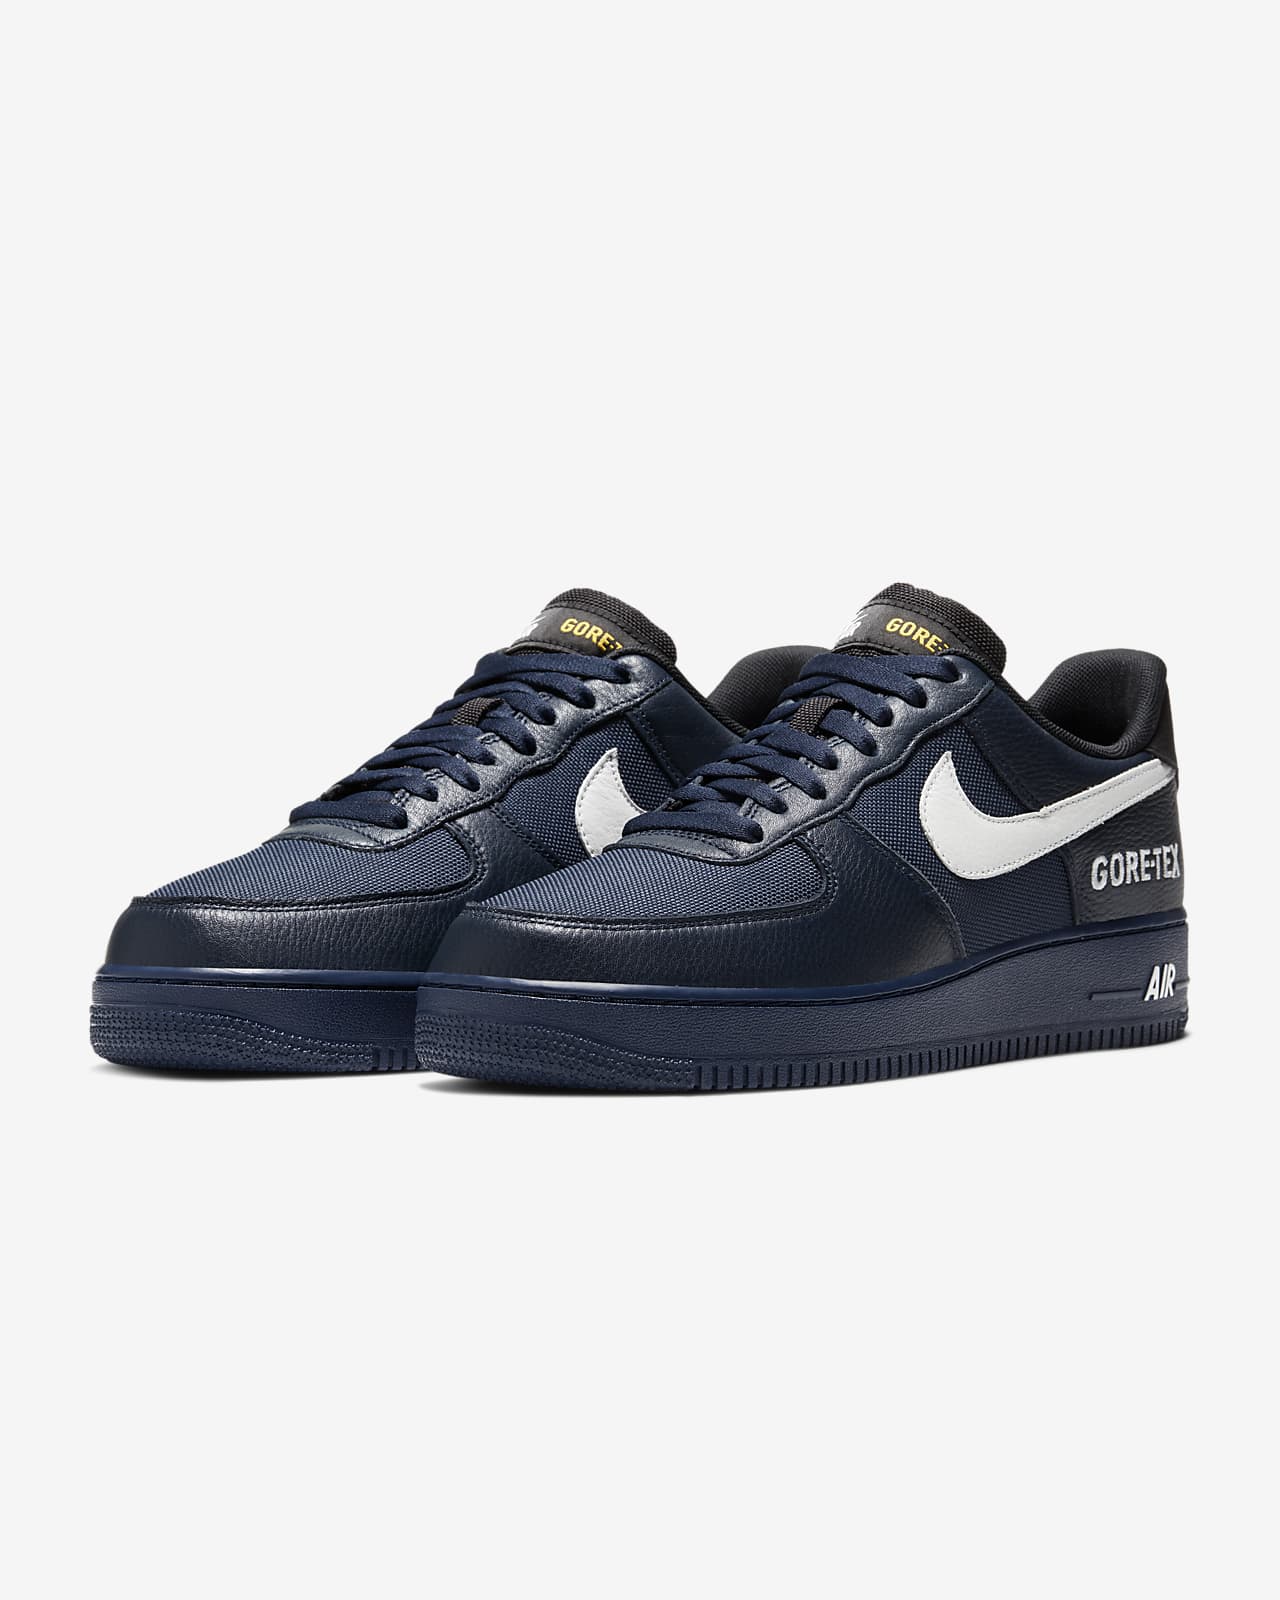 air force ones near me